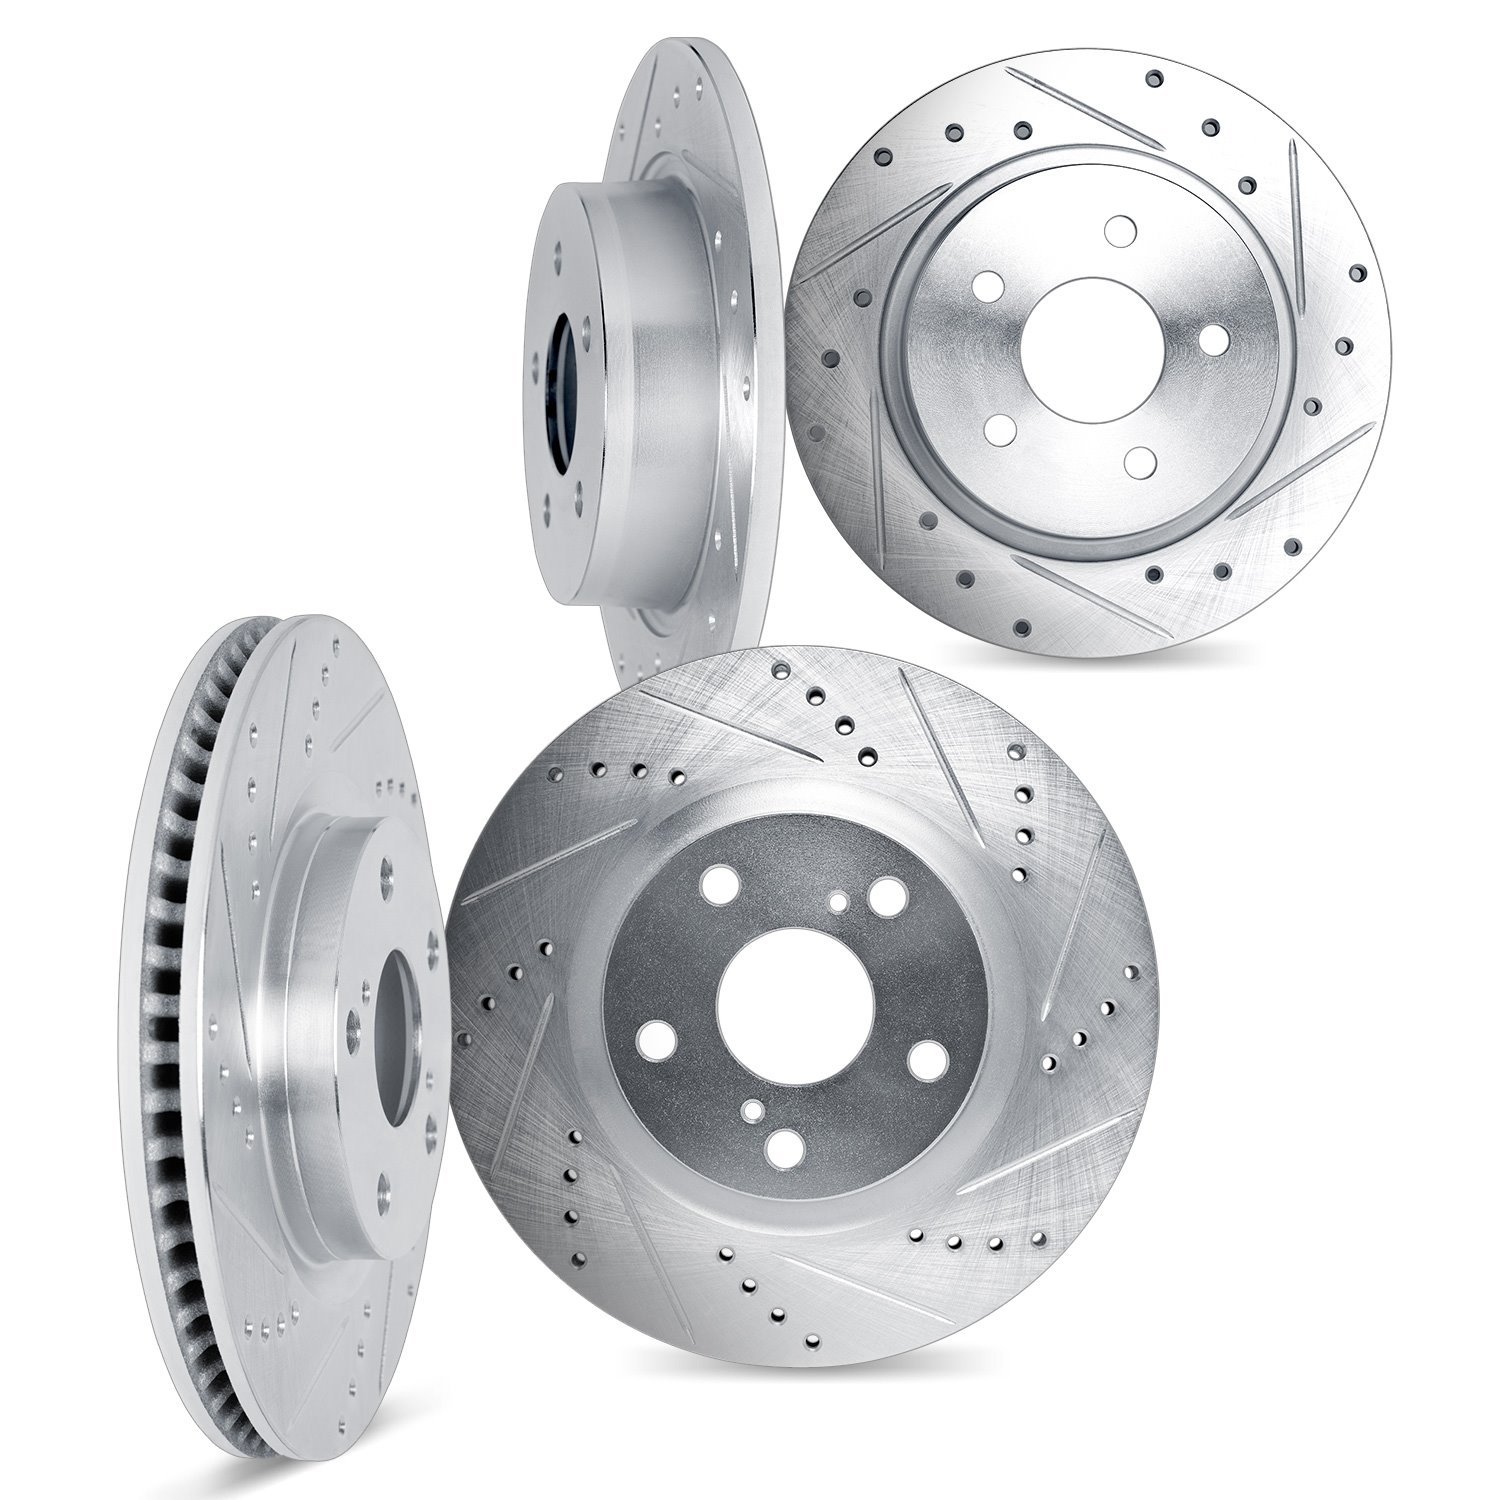 7004-31010 Drilled/Slotted Brake Rotors [Silver], Fits Select Multiple Makes/Models, Position: Front and Rear